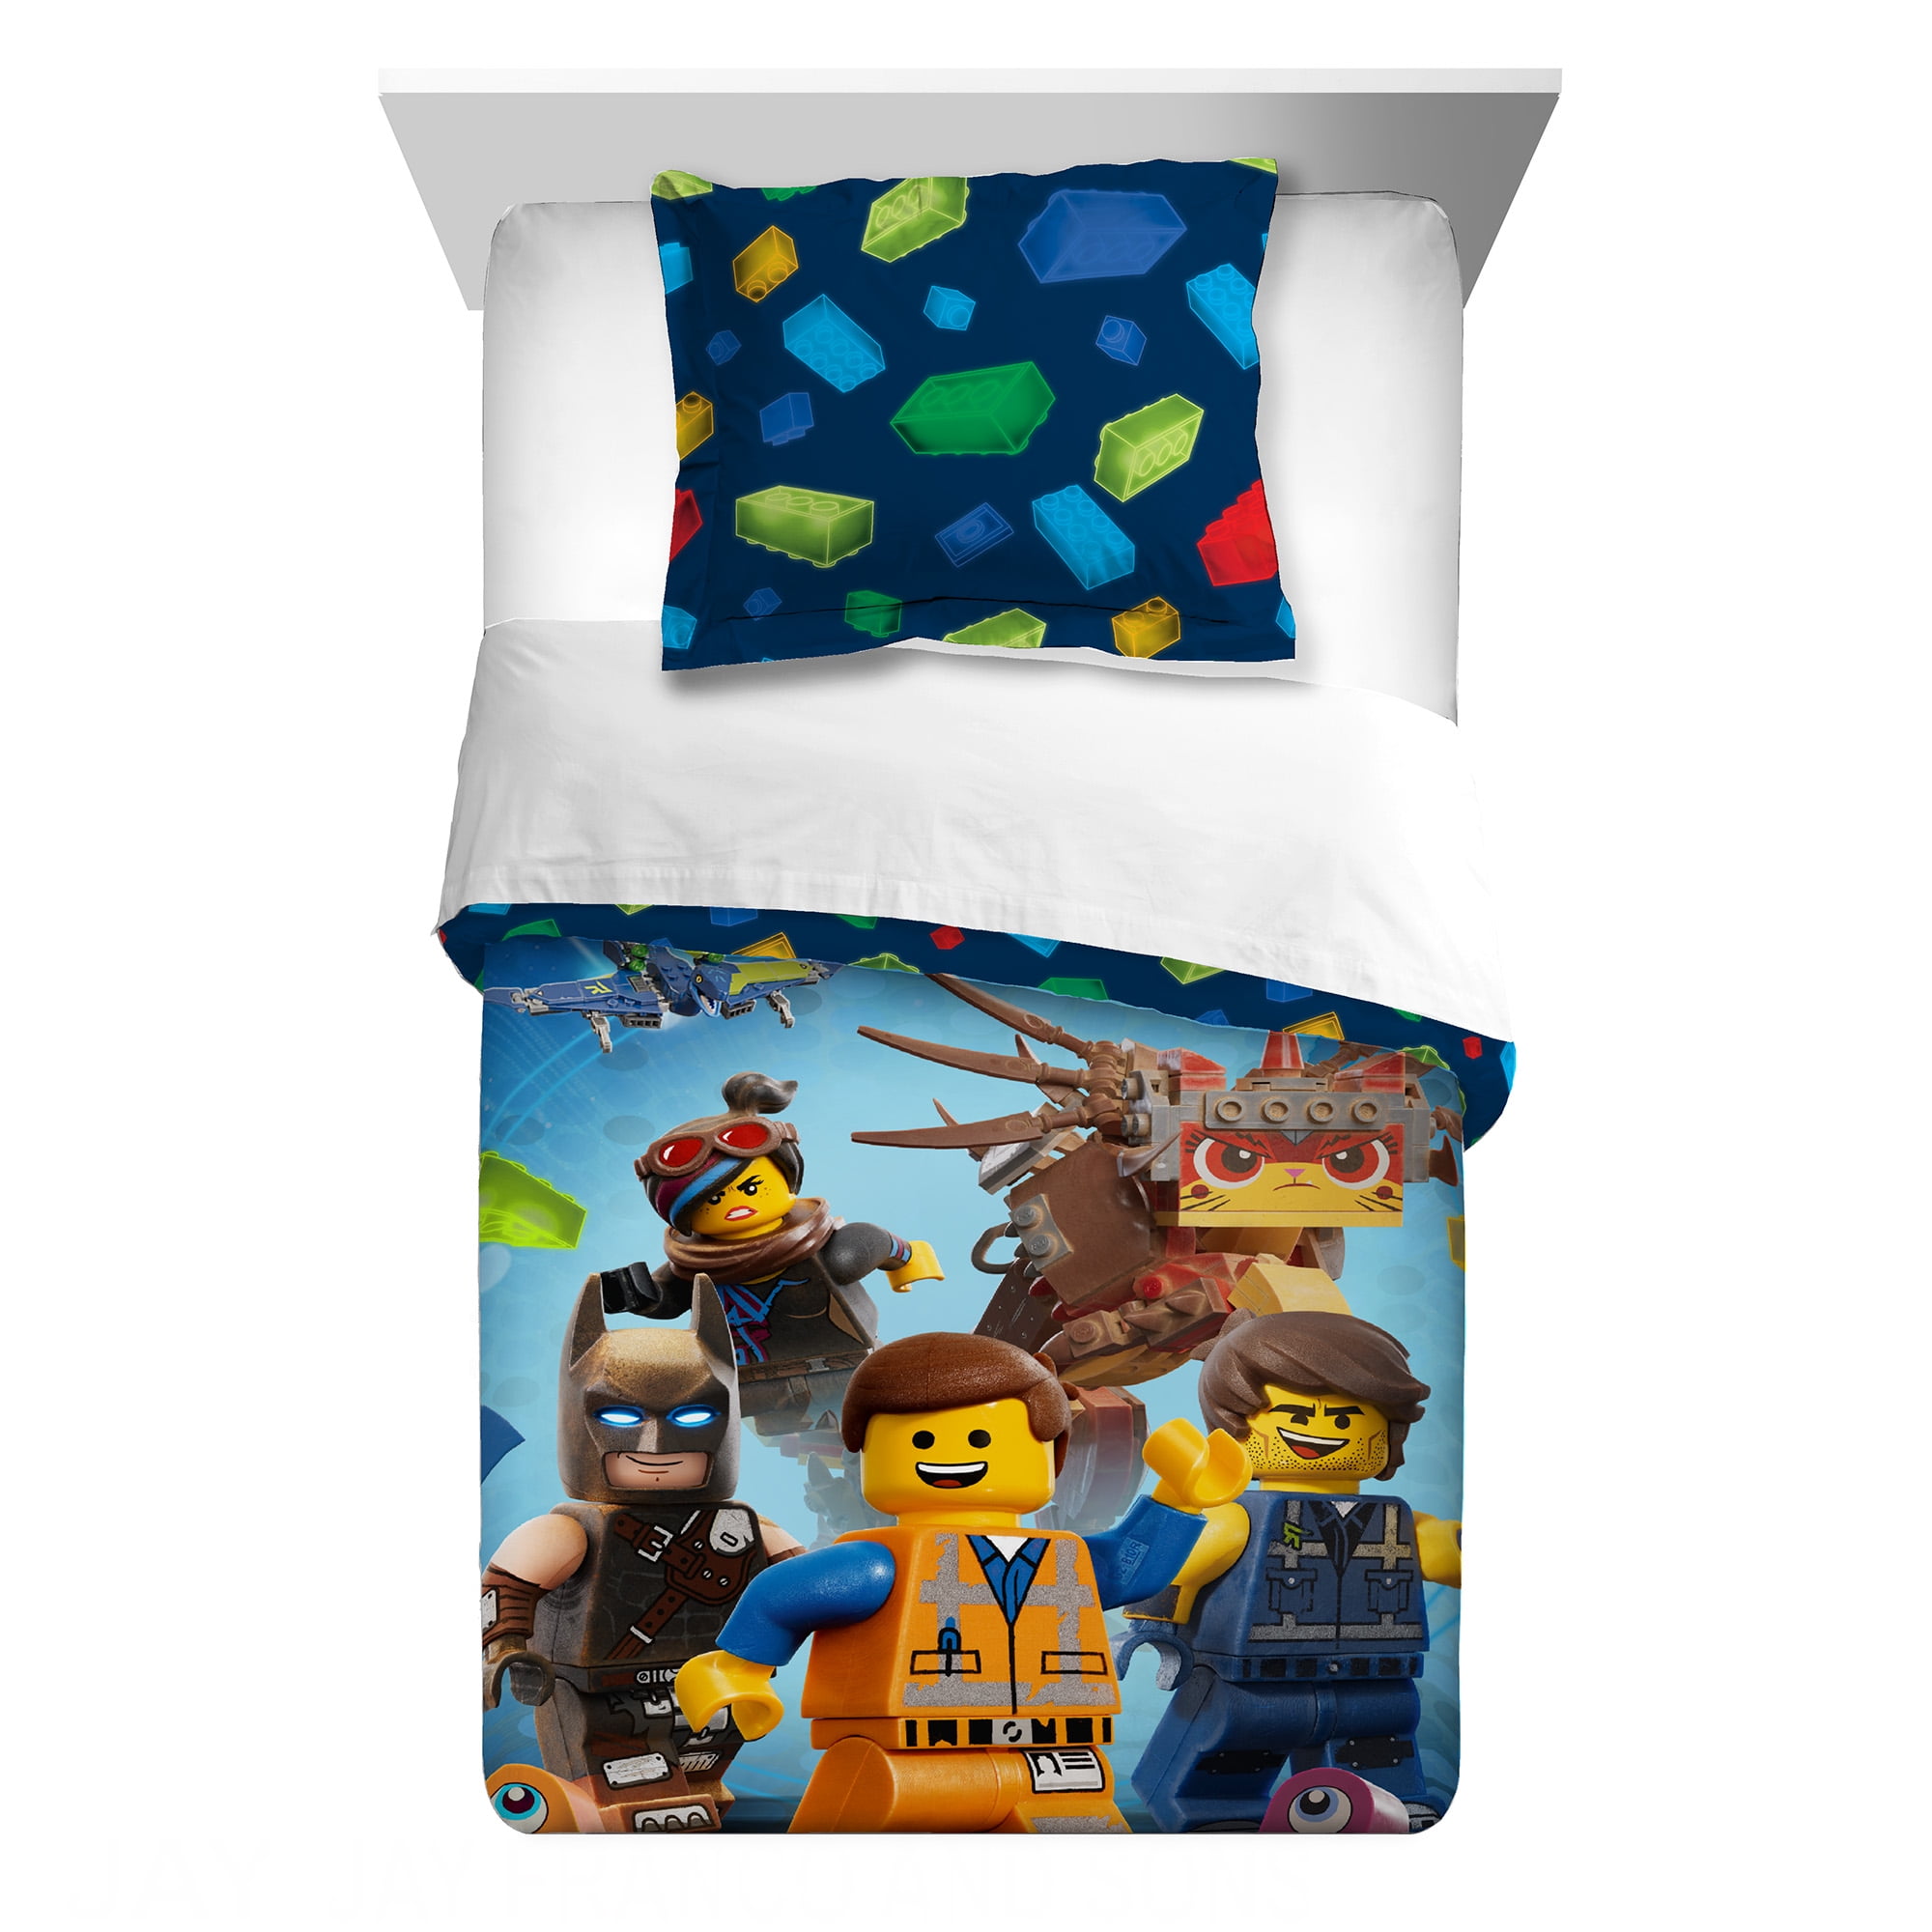 Microfiber TWIN BED Comforter Brand New ! The Lego Movie 2 Galactic Duo 